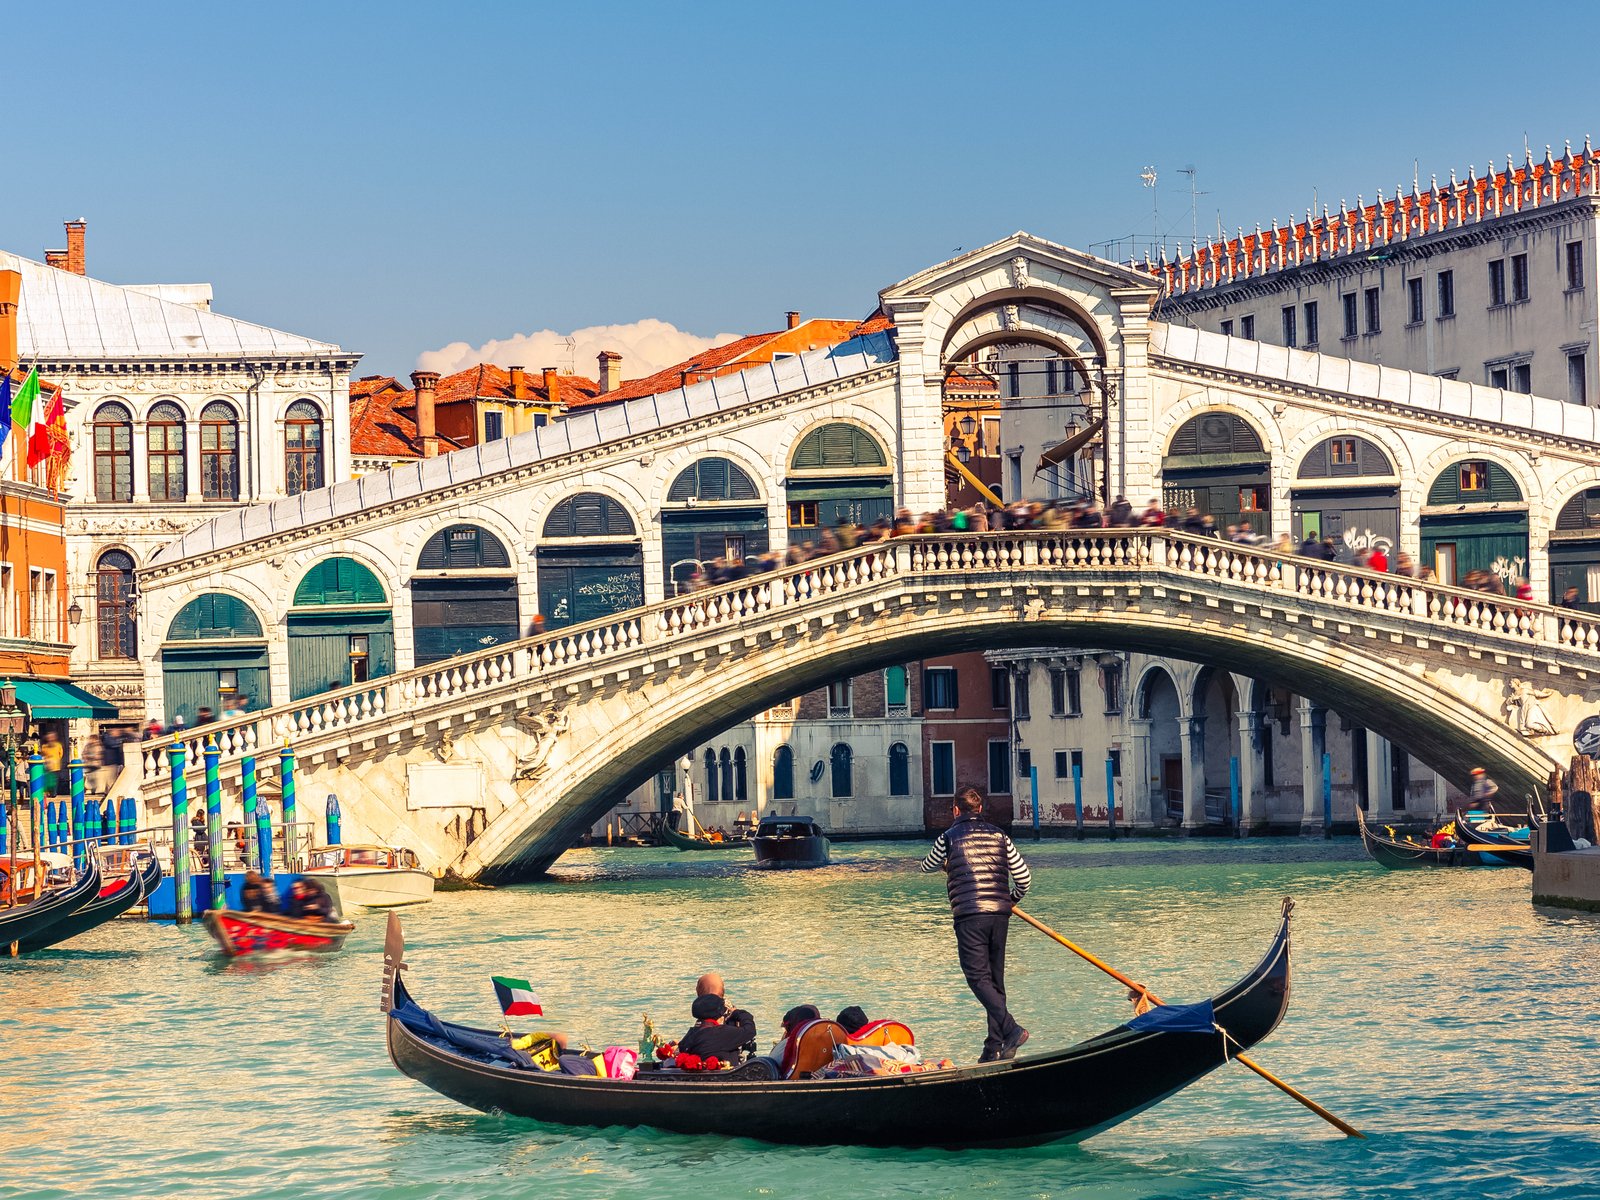 Venice Introduces Entry Fees and Requires Reservations Starting Next Summer